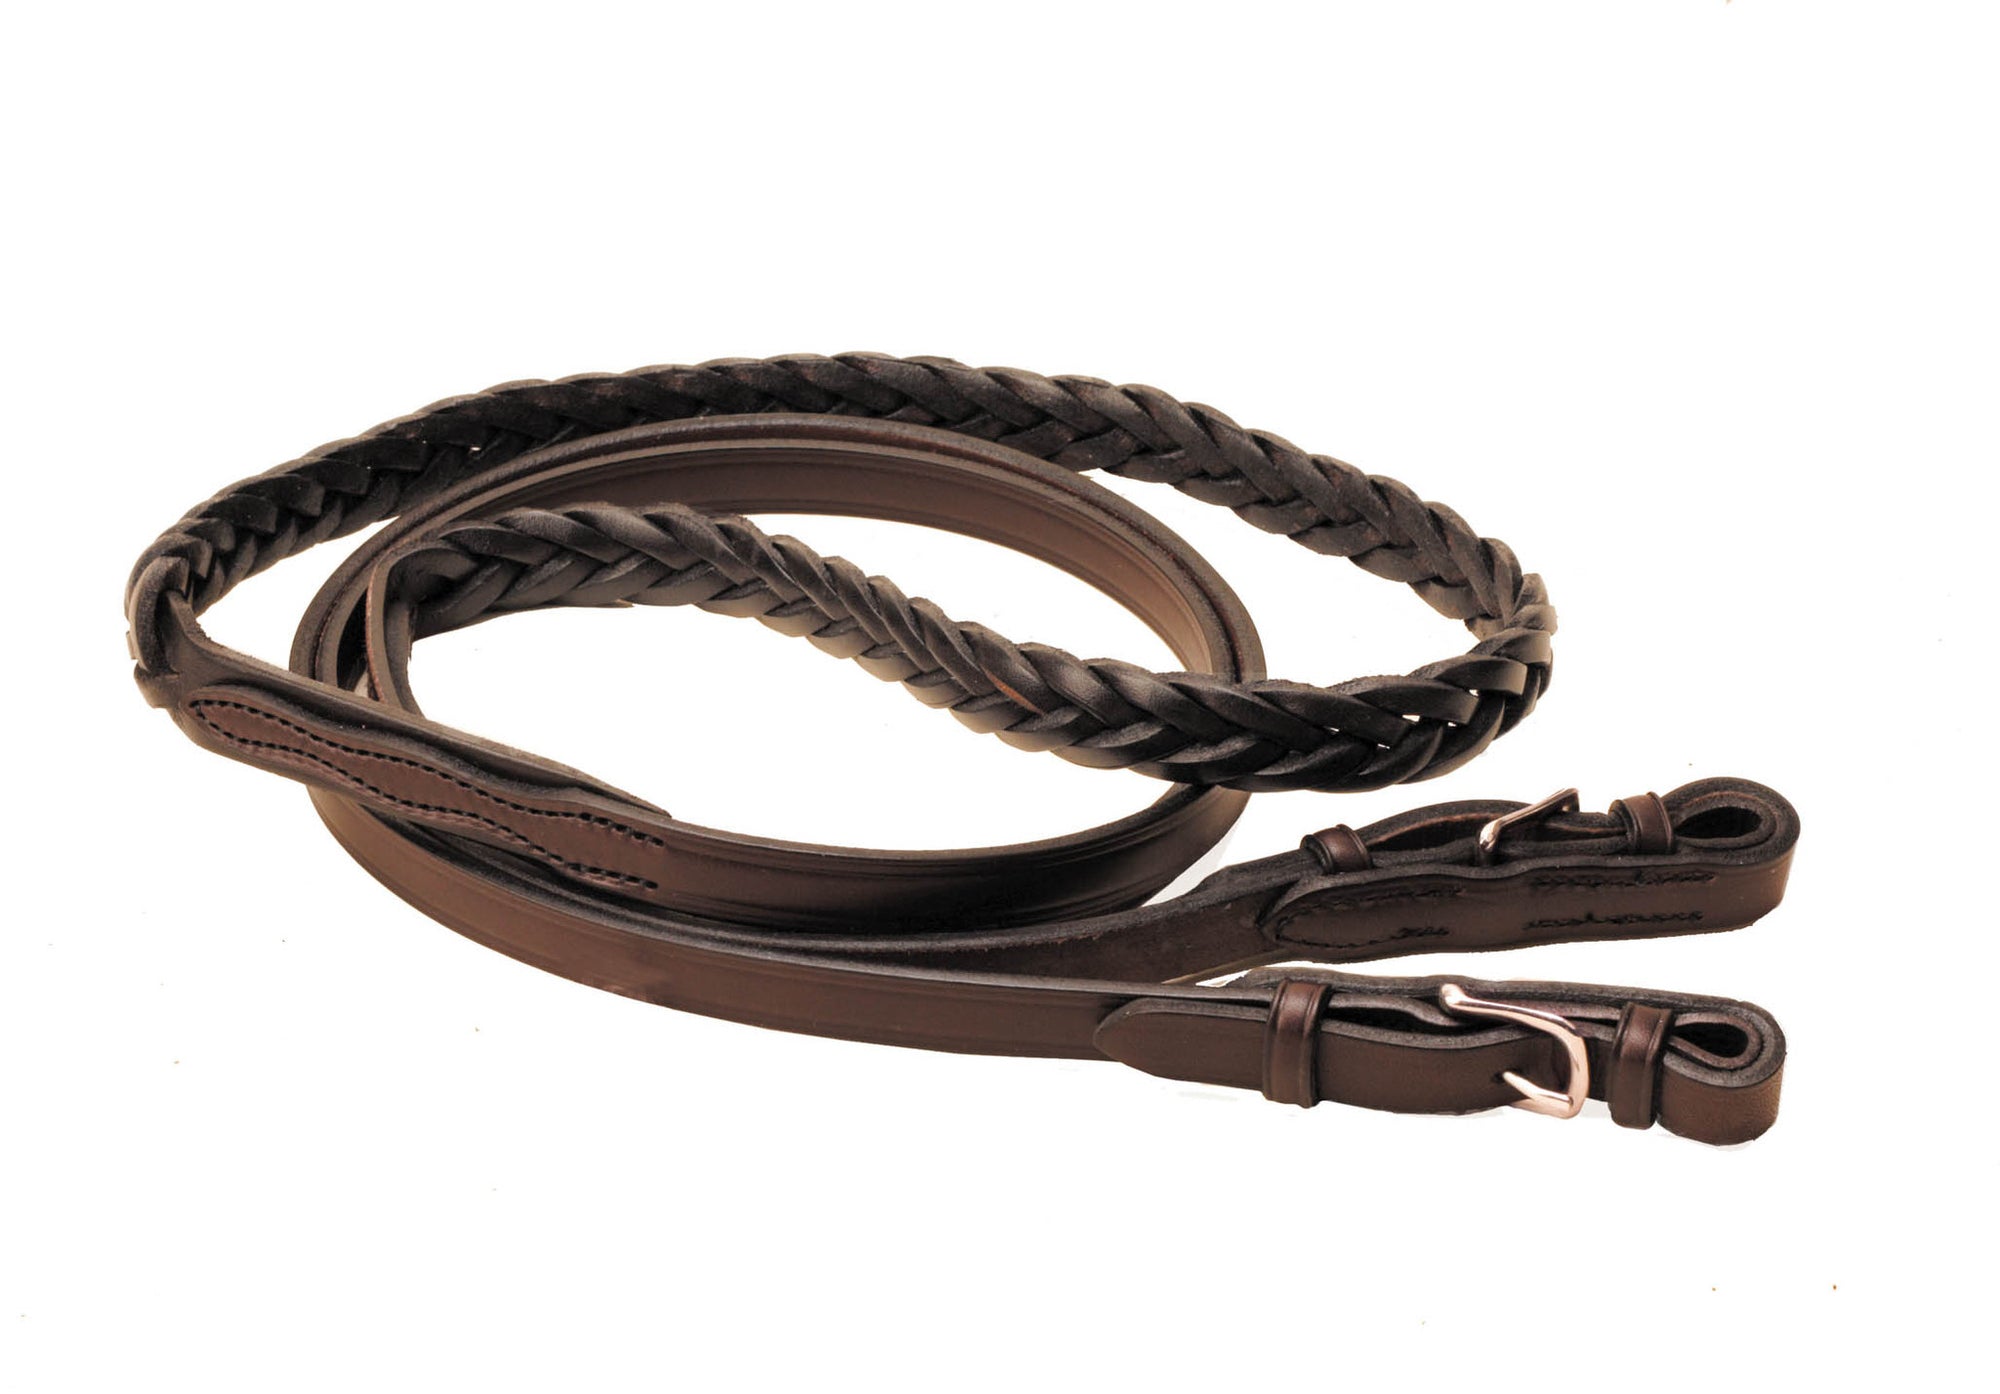 Tory Leather Plait Braided Roping Rein